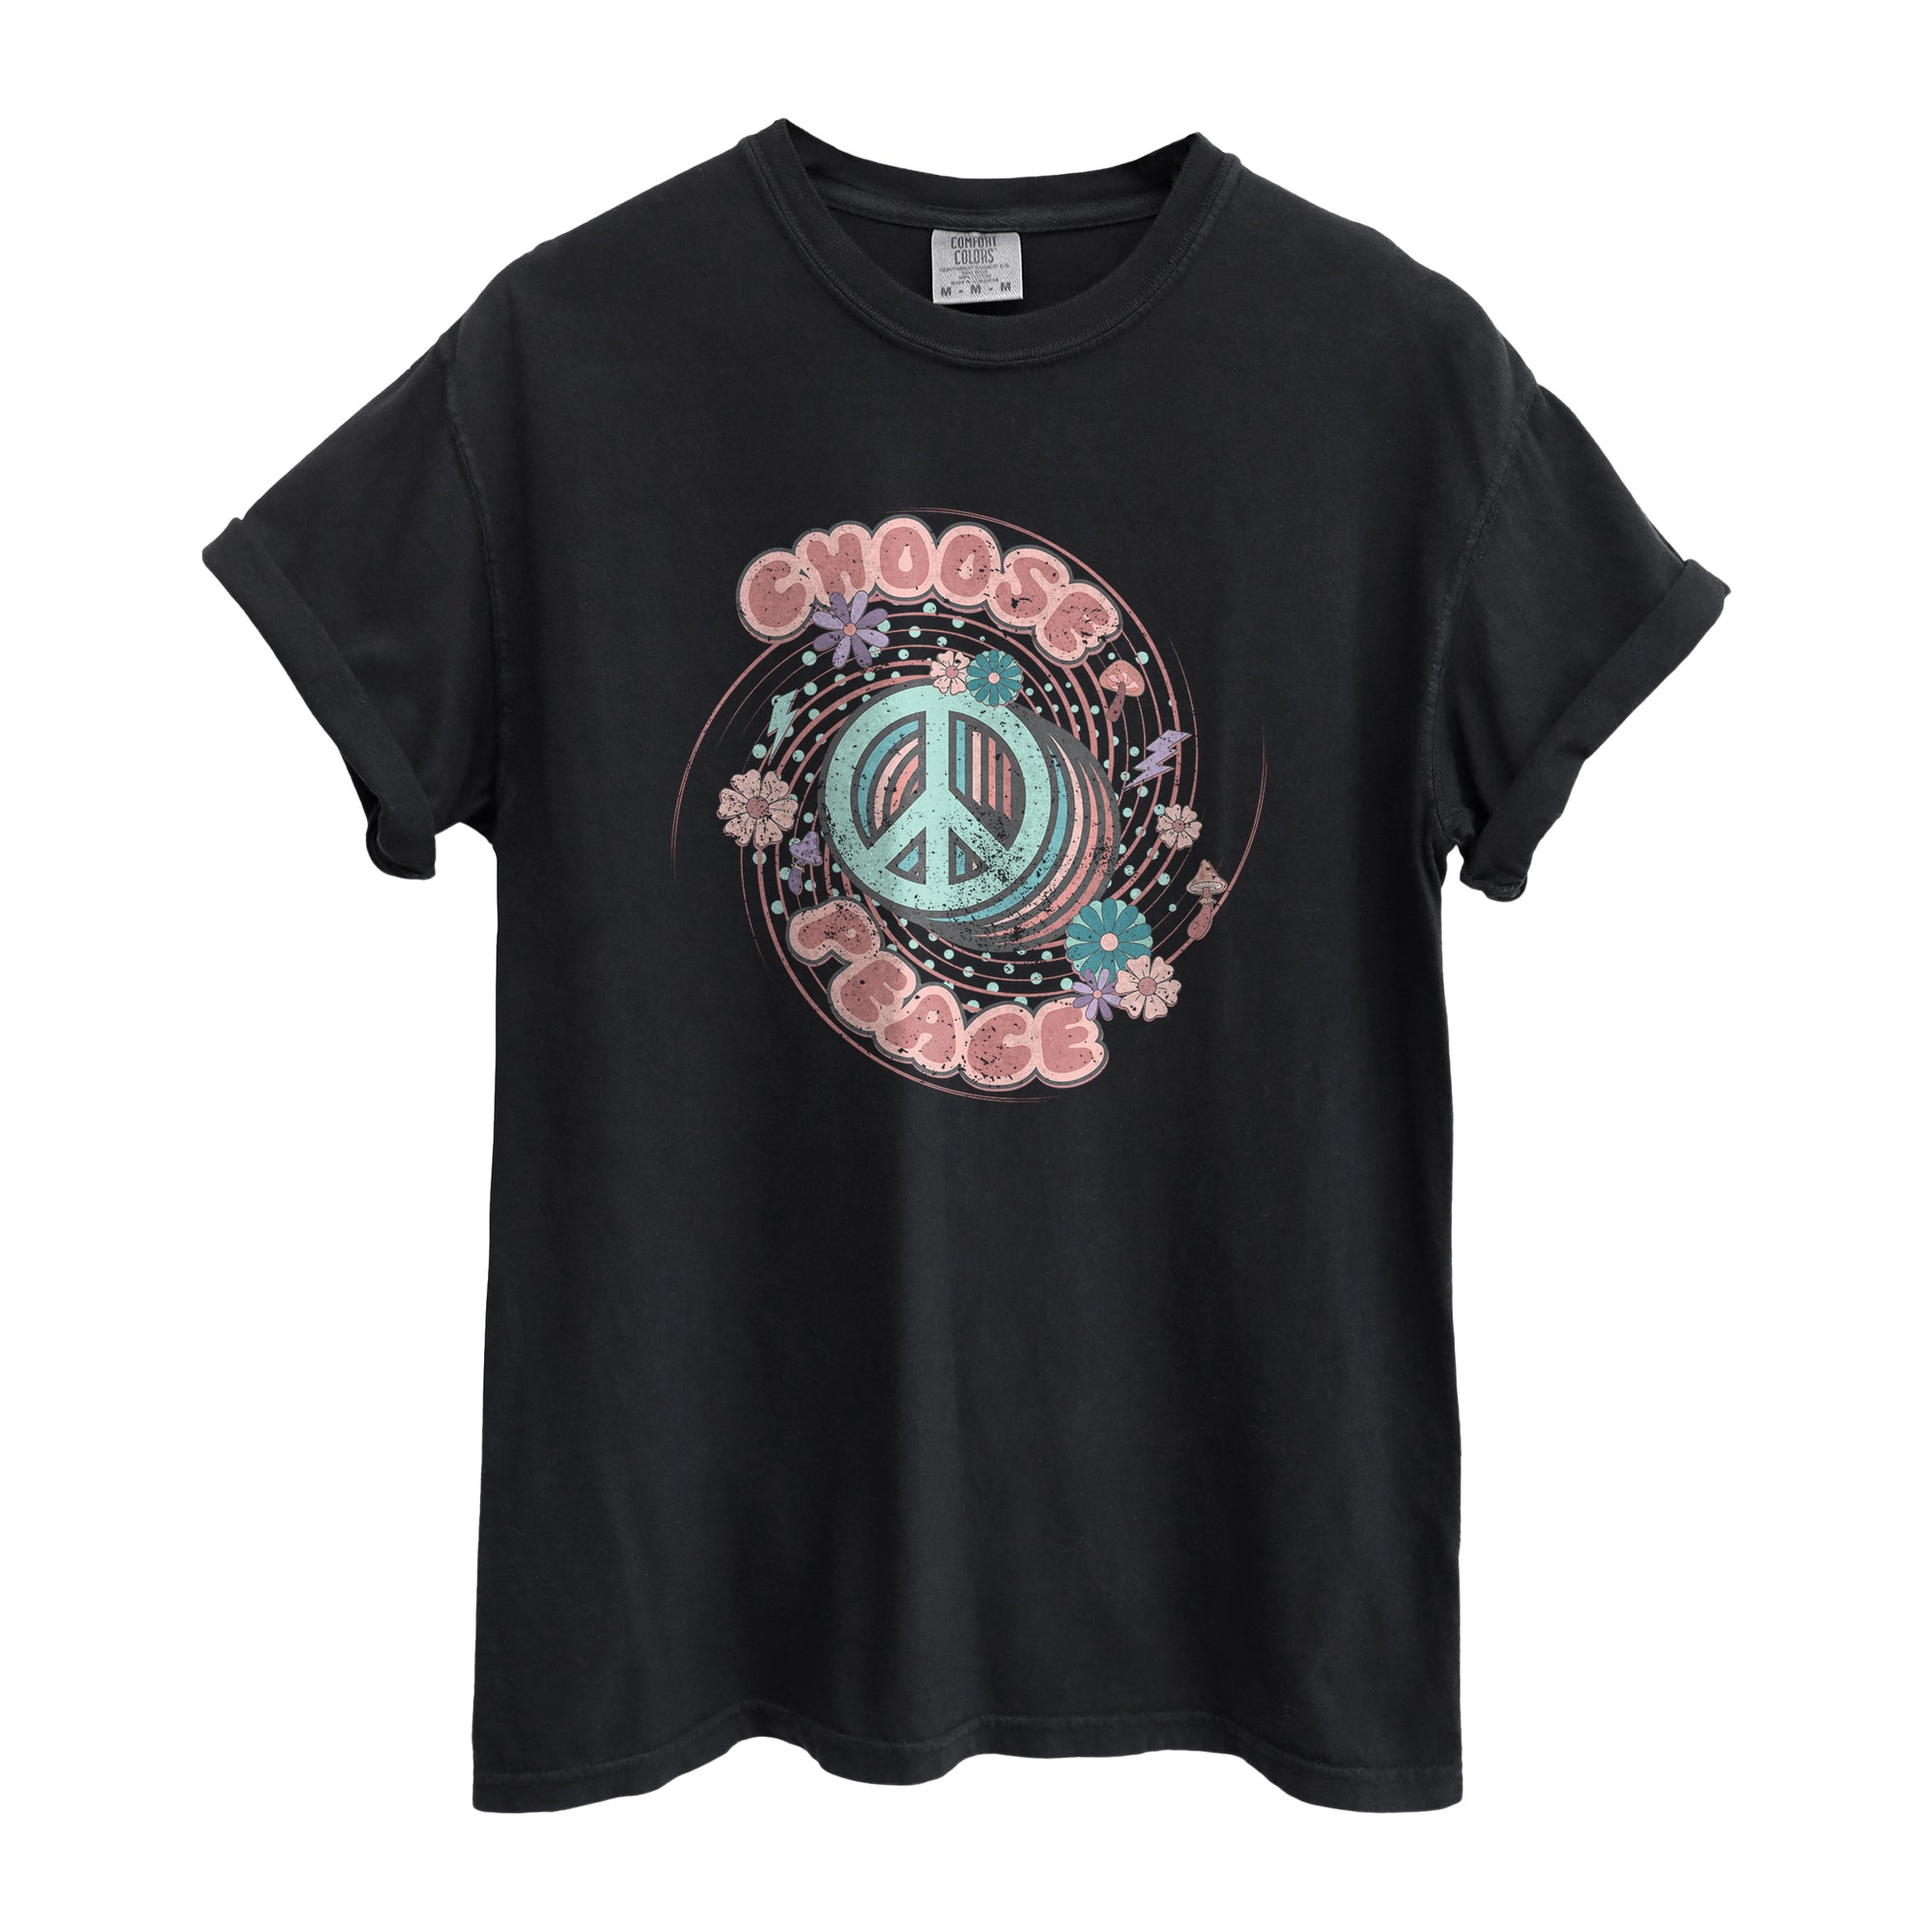 Choose Peace Oversized Shirt Garment-Dyed Graphic Tee